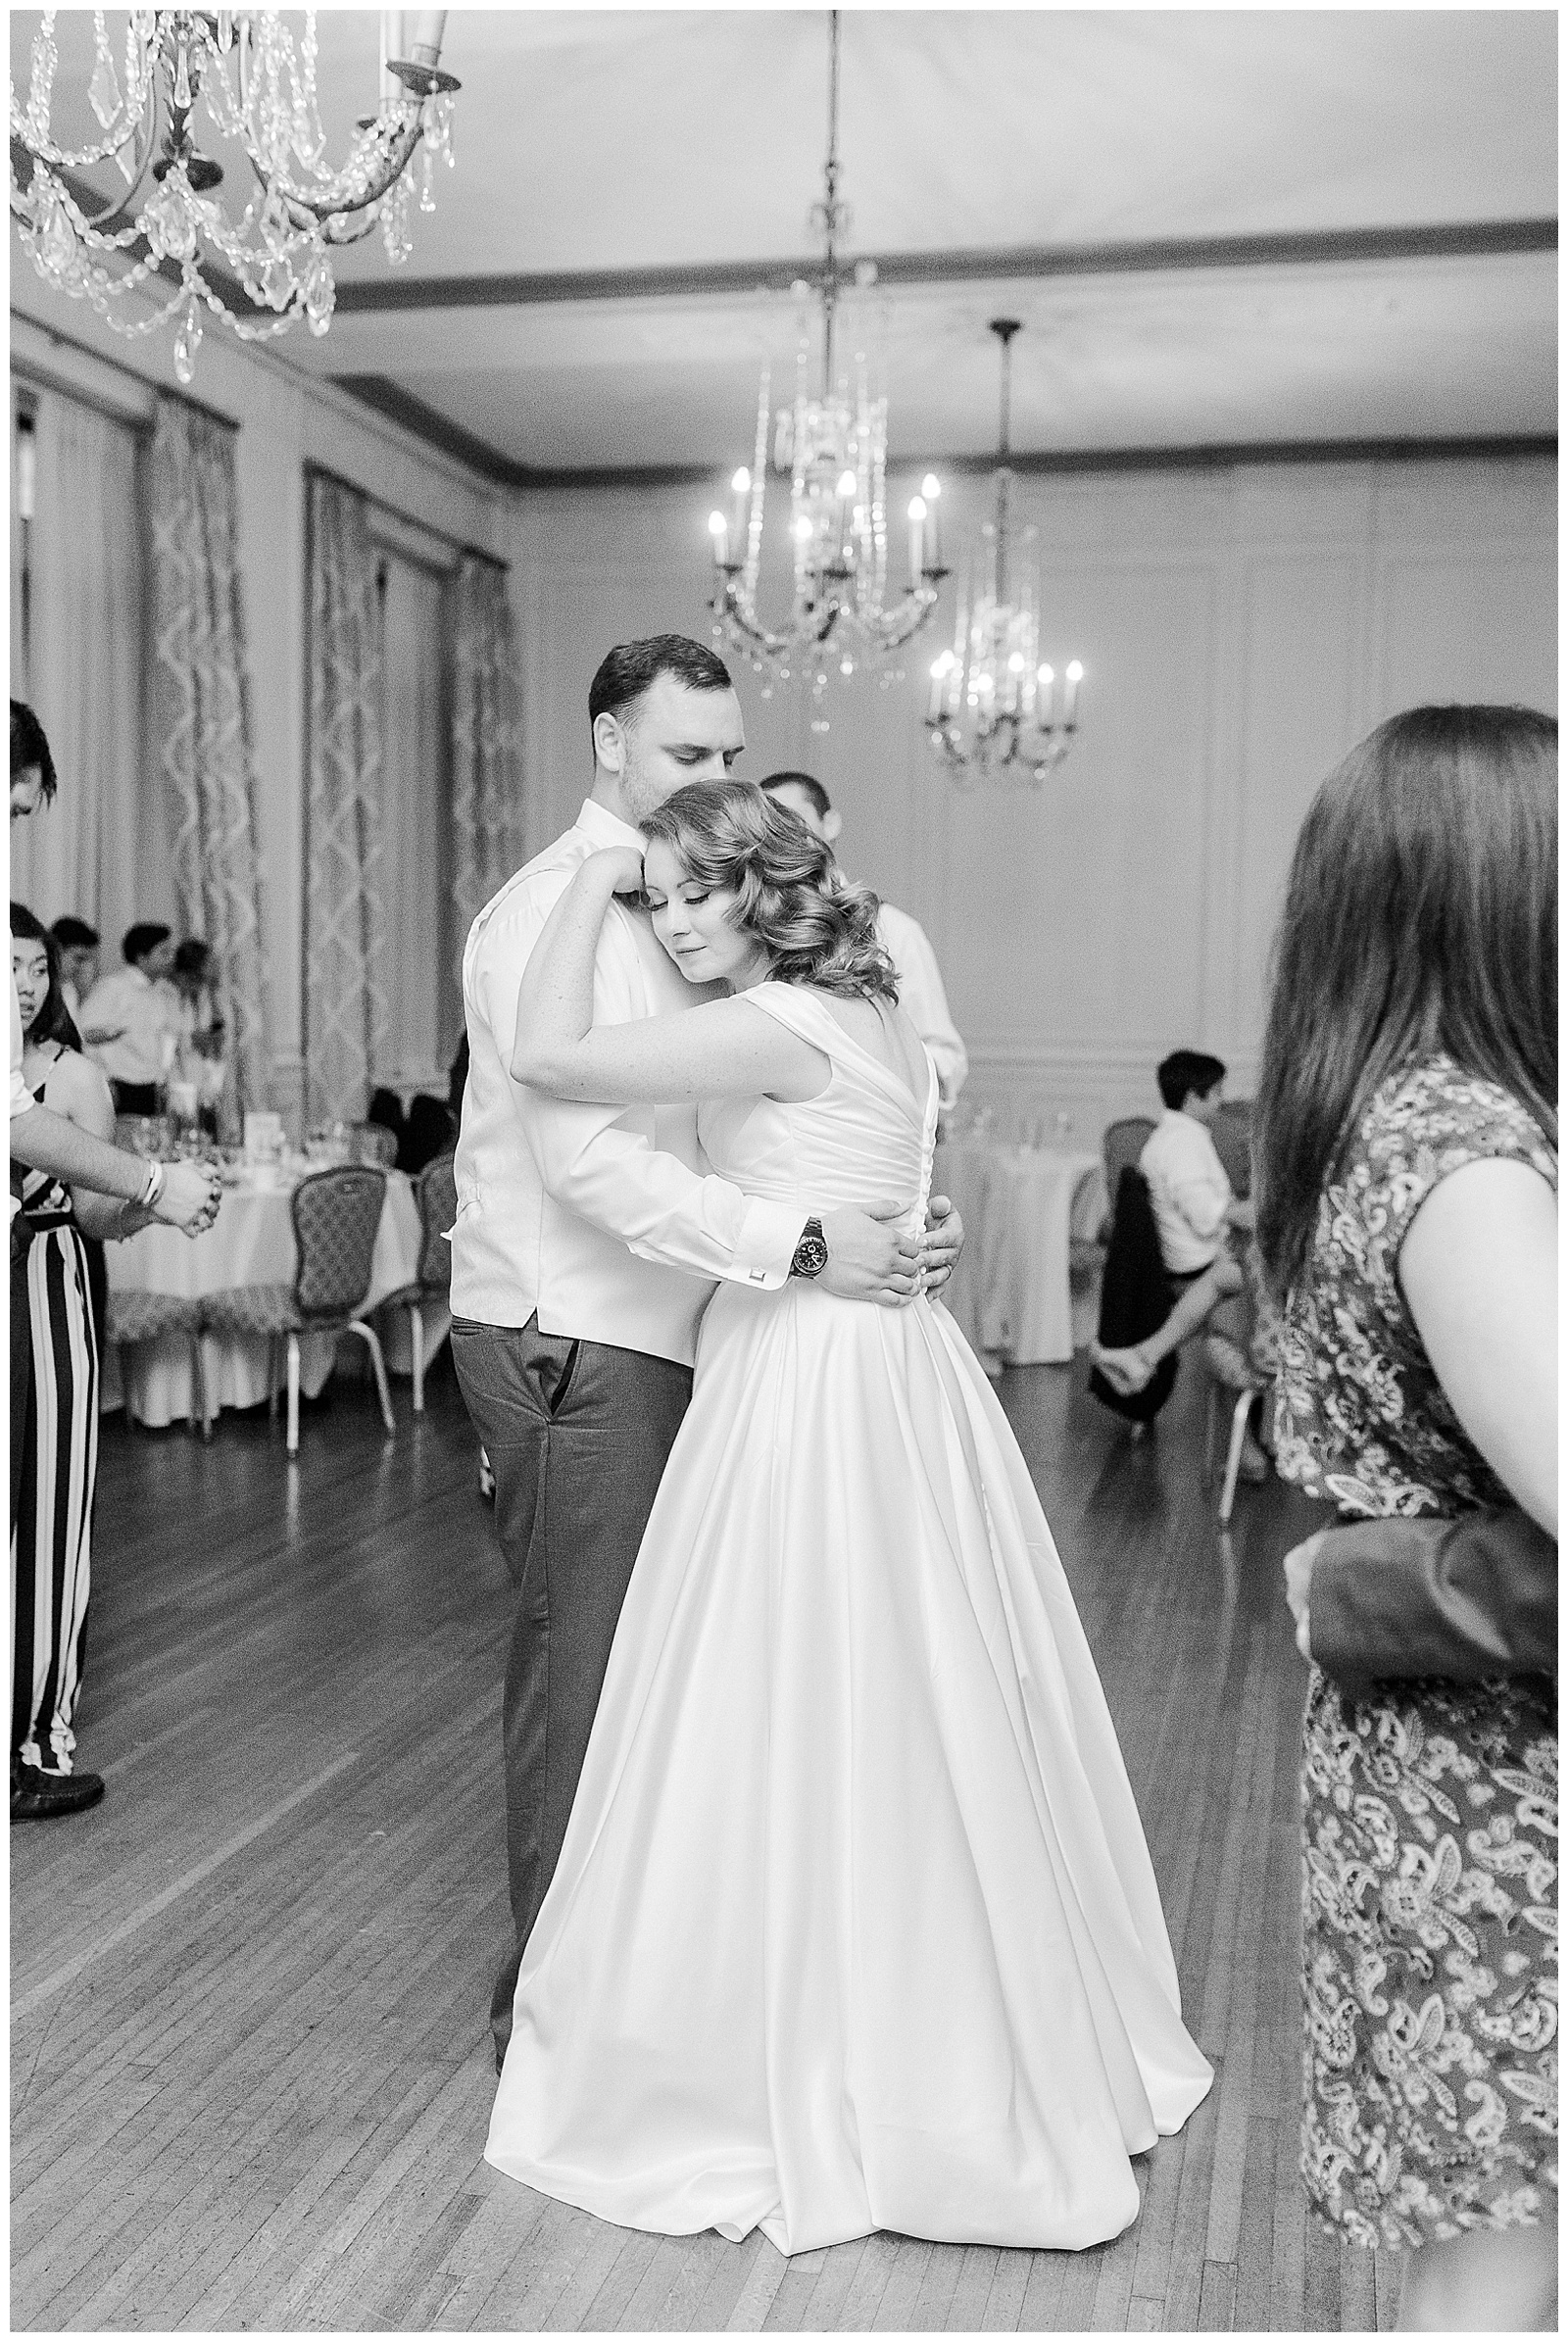 Bride and Groom share a special moment at elegant indoor floral venue in 1940s Modern Vintage Wedding in Charlotte, NC | check out the full wedding at KevynDixonPhoto.com